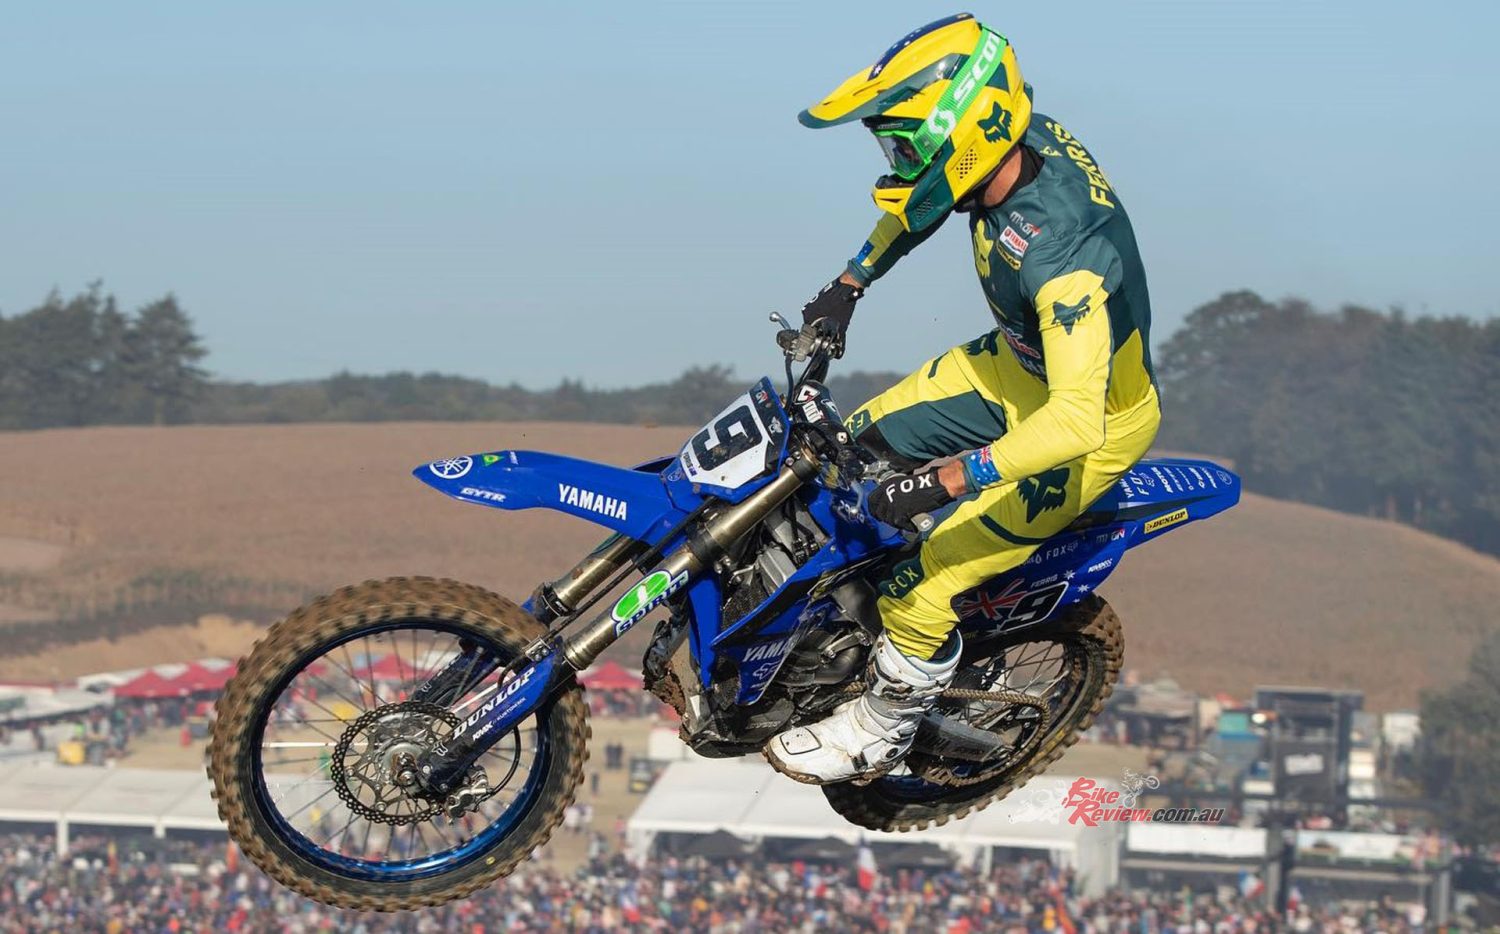 Experienced campaigner Dean Ferris headed to Ernee fresh from winning the Australian ProMX MX1 crown, eager to impress in what was his seventh MXoN.